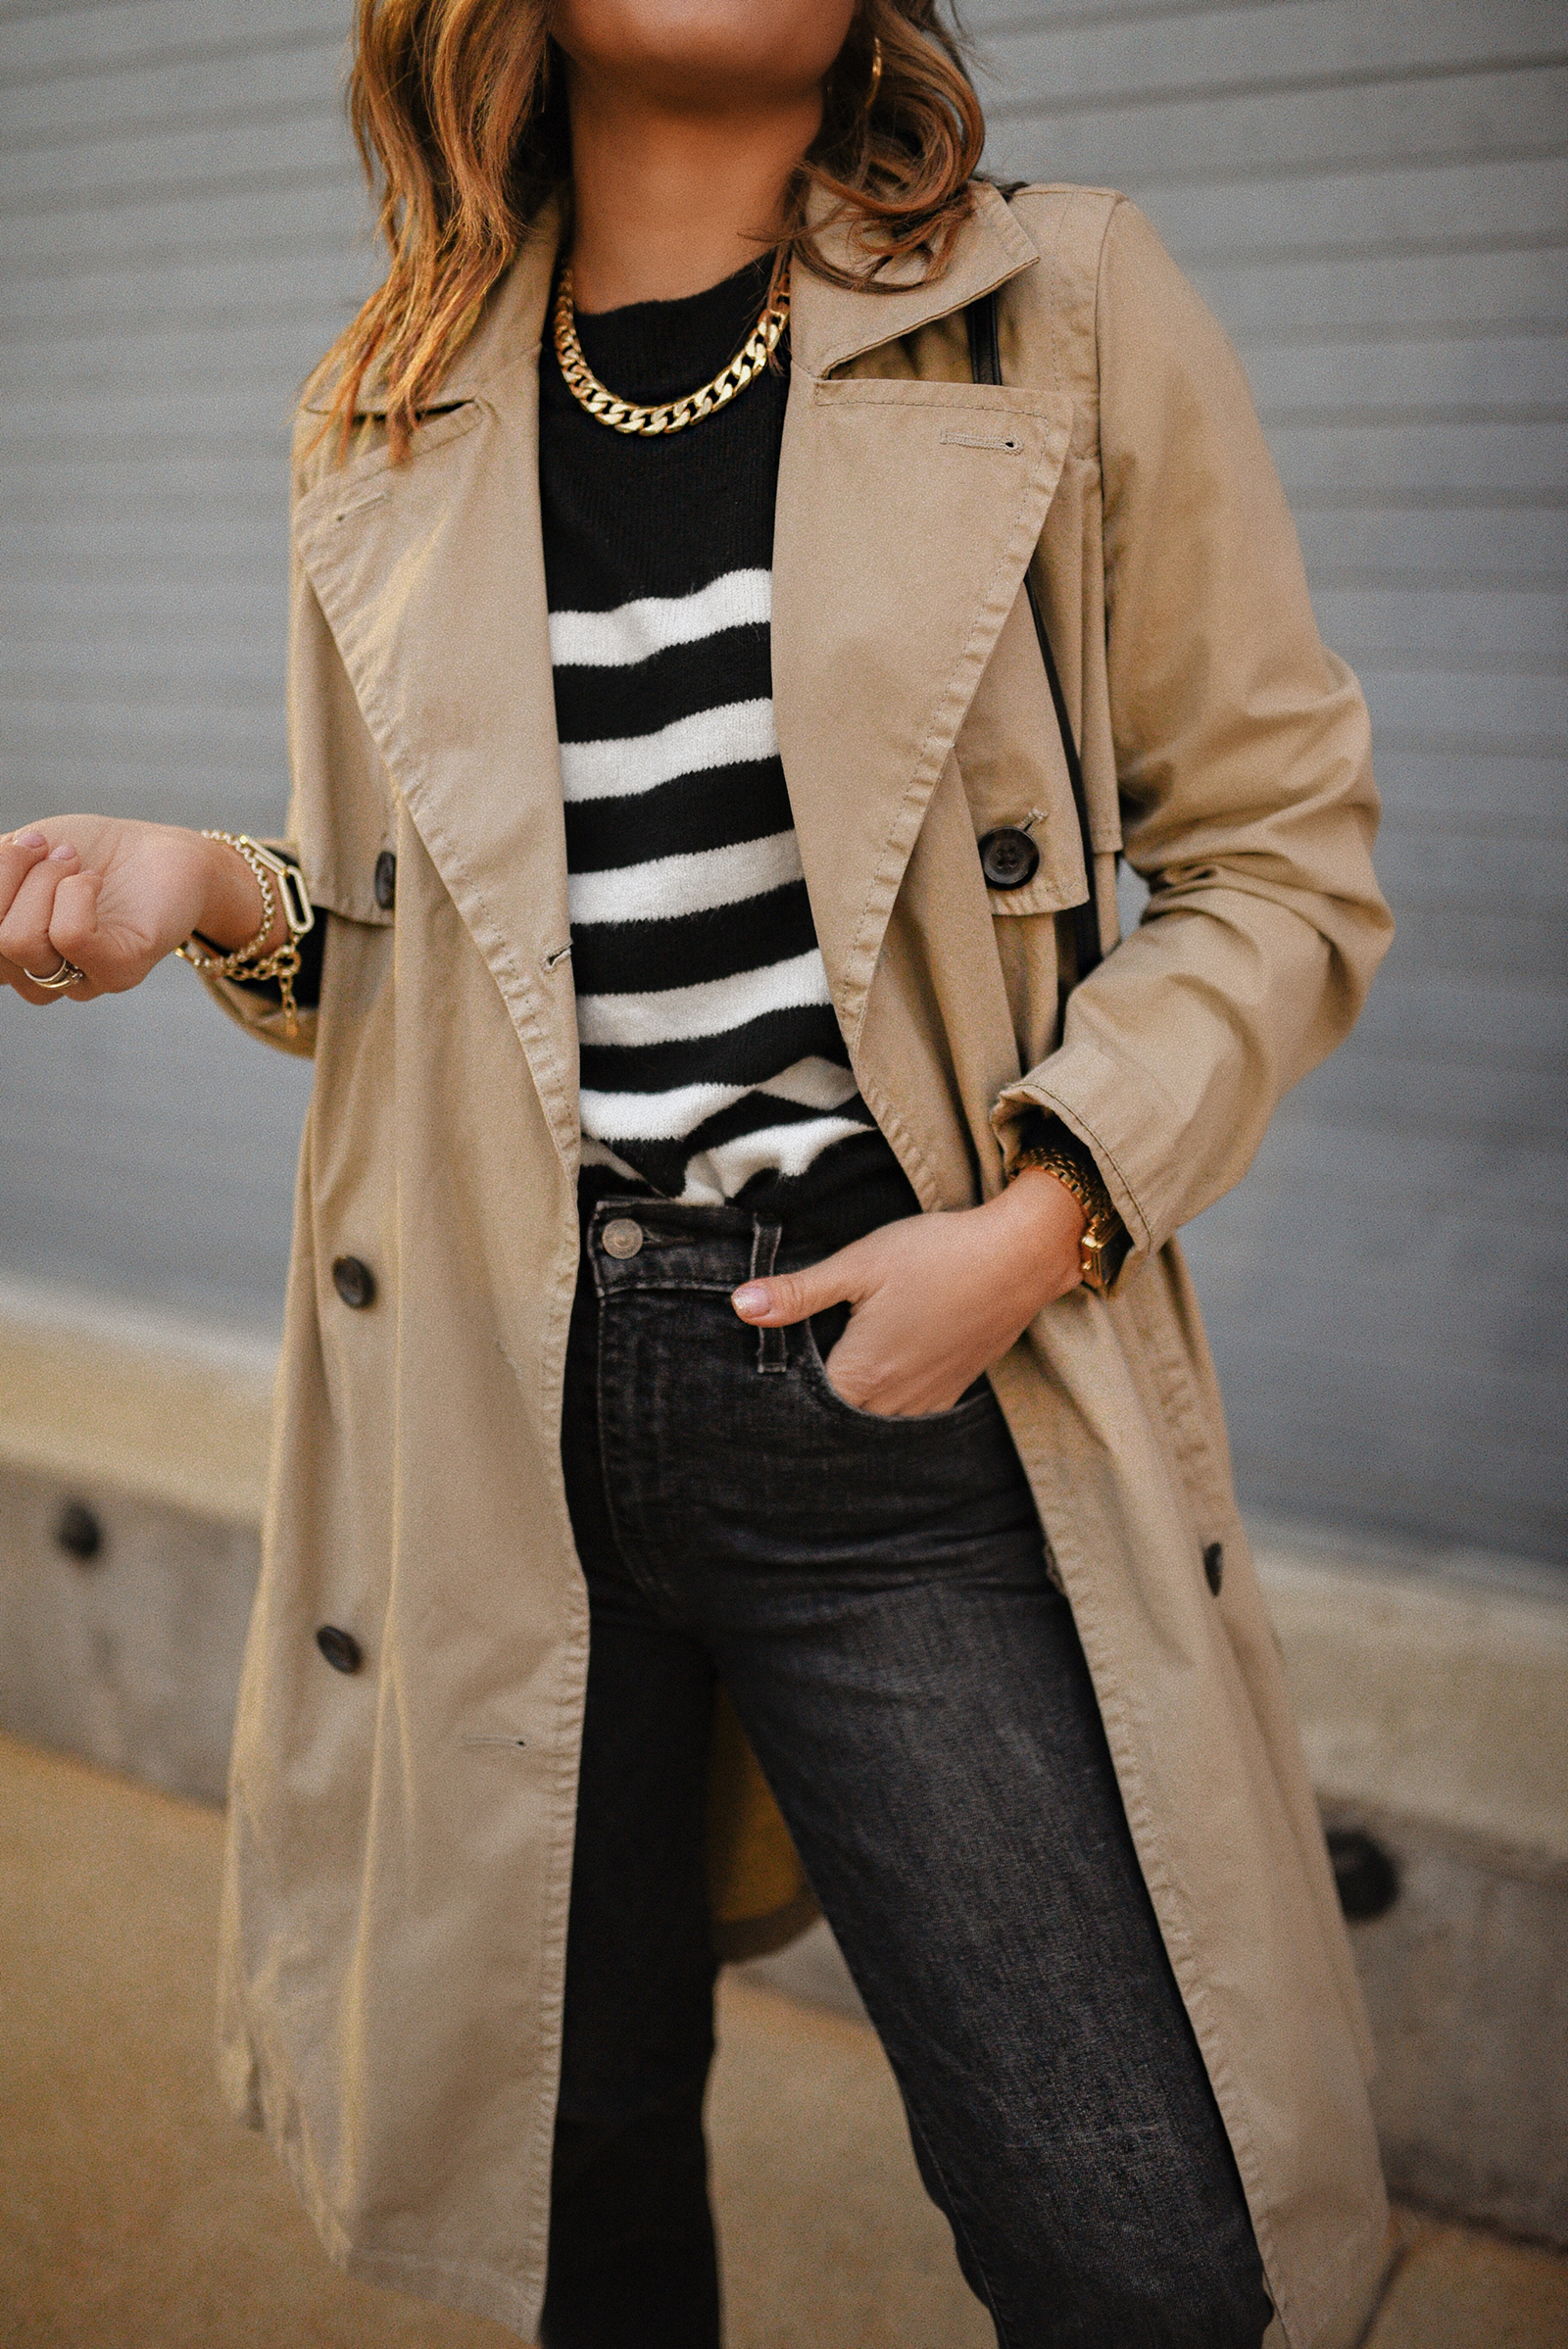 Carolina Hellal of Chic Talk wearing a Madewell trench coat, H&M striped sweater, Levi's grey jeans, Vince Camuto flats and YSL crossbody bag. 